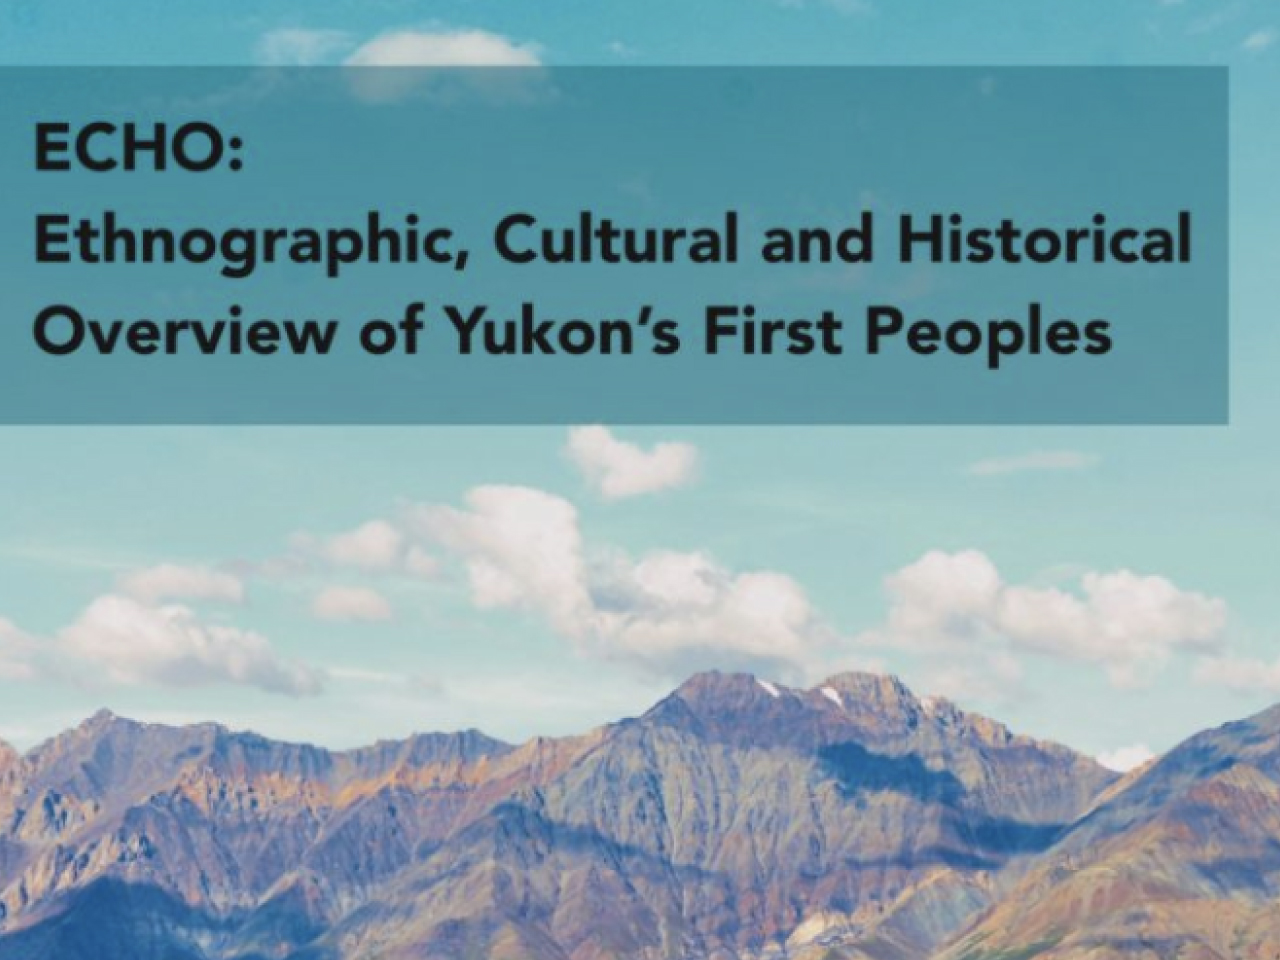 ECHO : ethnographic, cultural and historical overview of Yukon's First Peoples